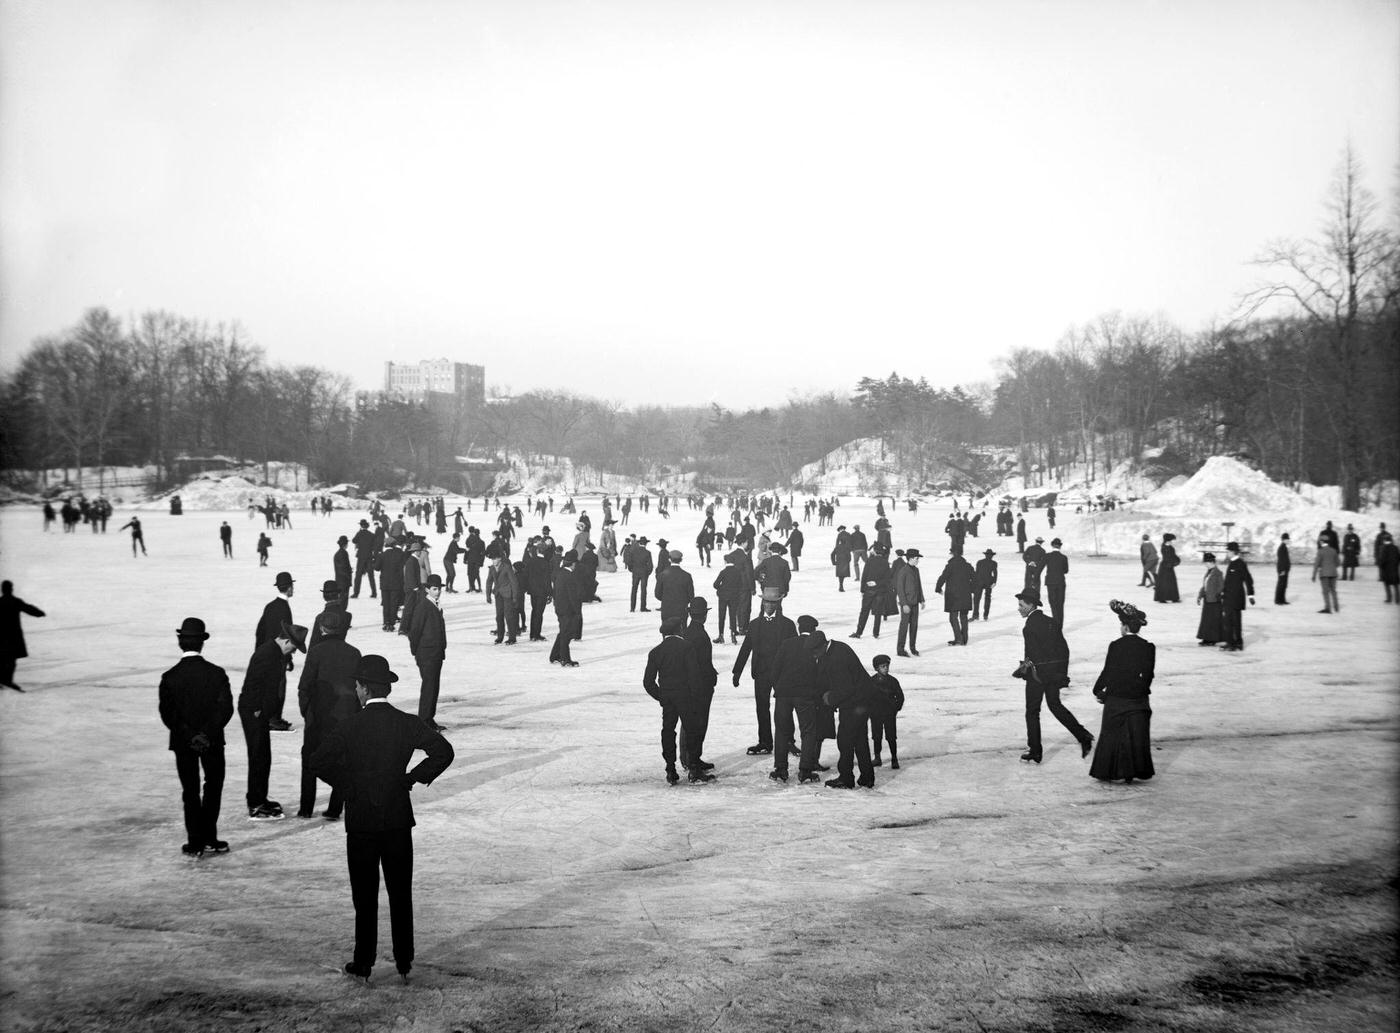 People Skating, Central Park, New York City, 1900